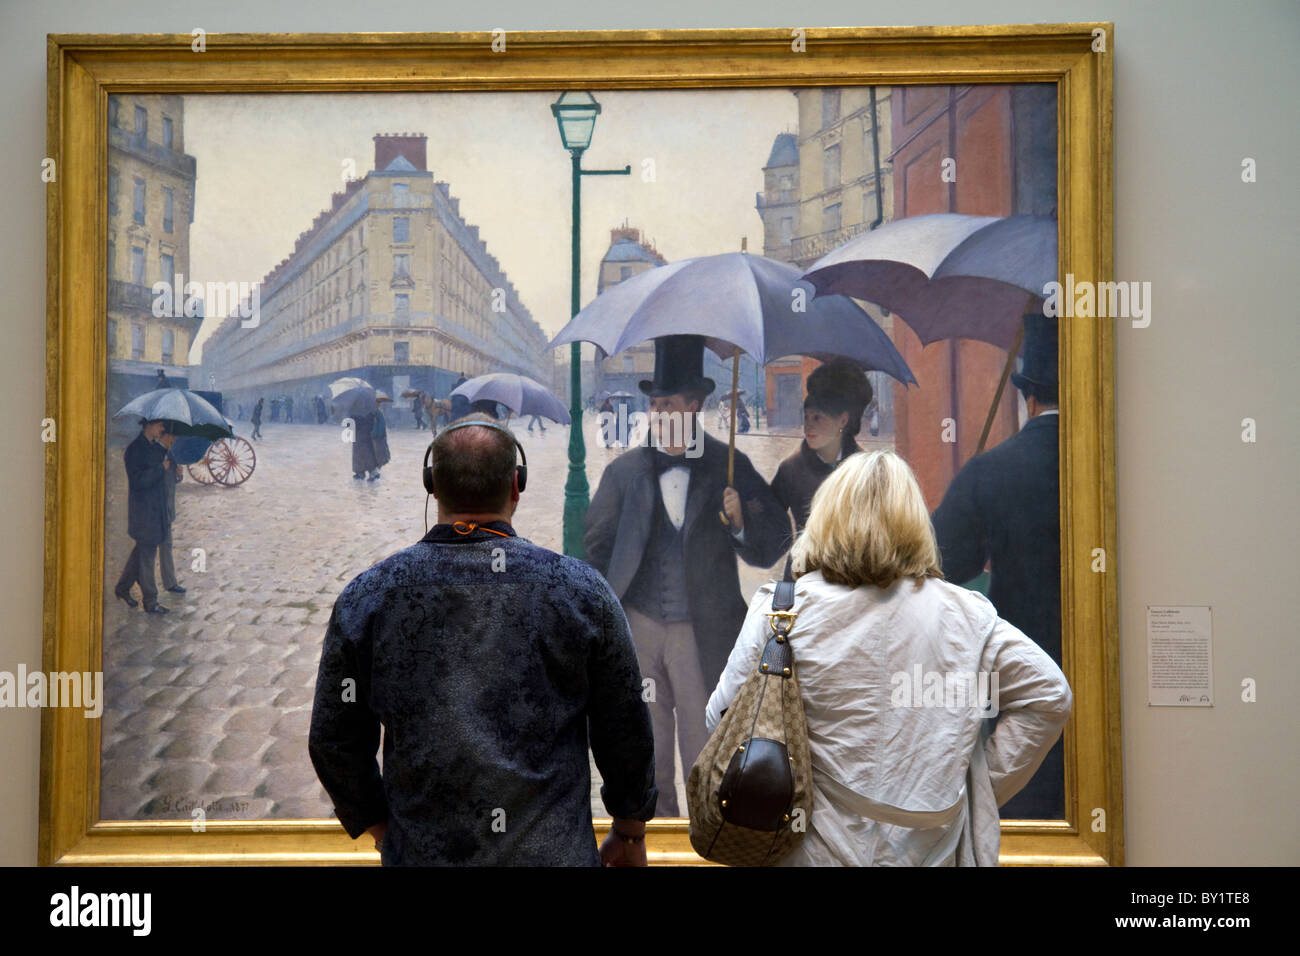 Paris Street Rainy Day Painting By Gustave Caillebotte Displayed At The Art Institute Of Chicago Illinois Usa Stock Photo Alamy